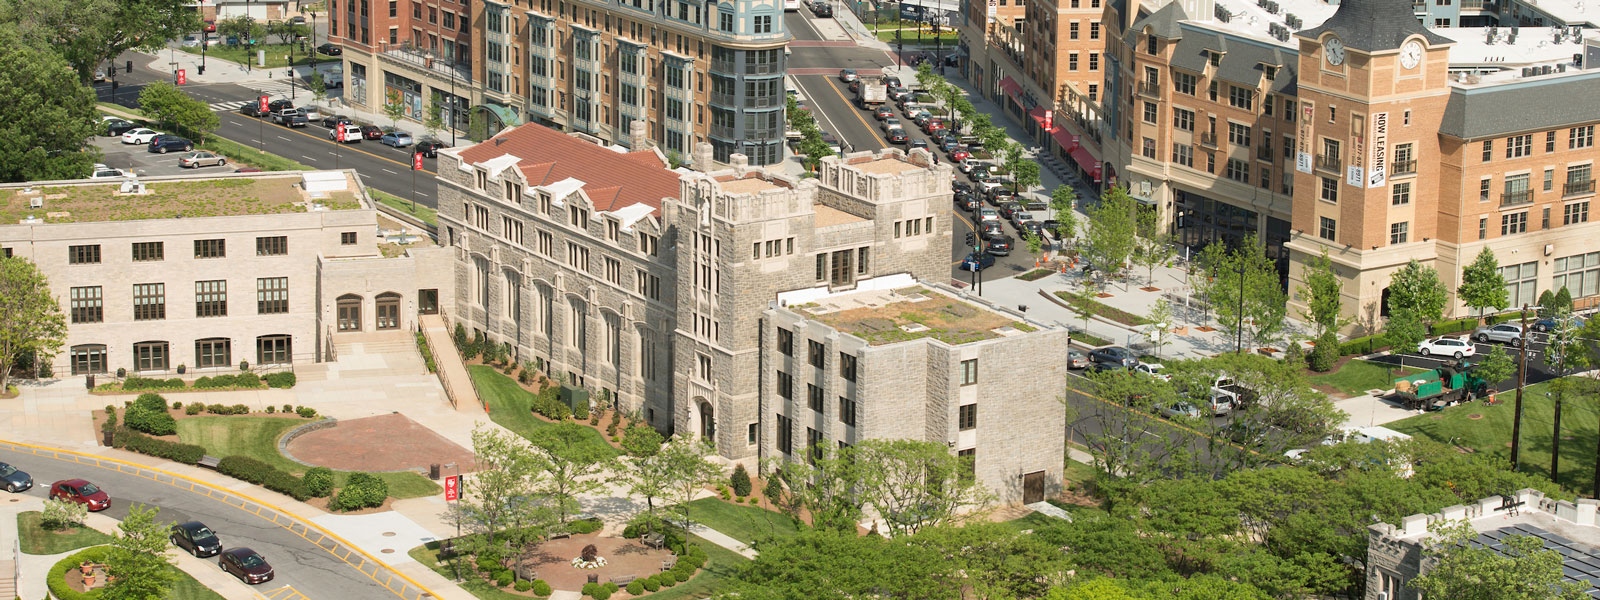 Overhead shot of on-campus and off-campus building